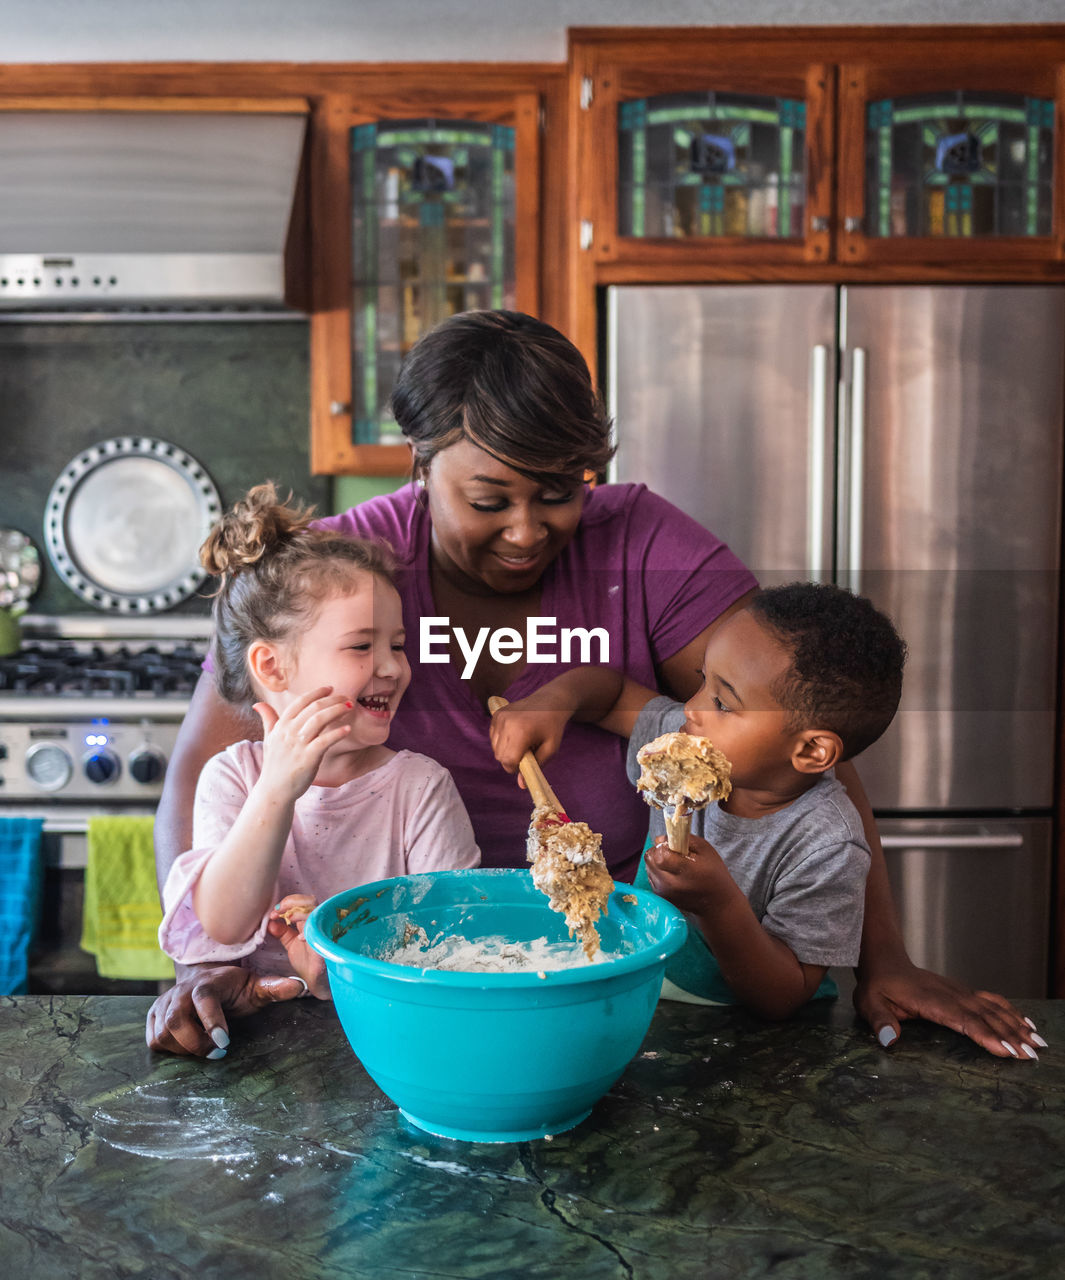 Mother smiling while kids make cookies together